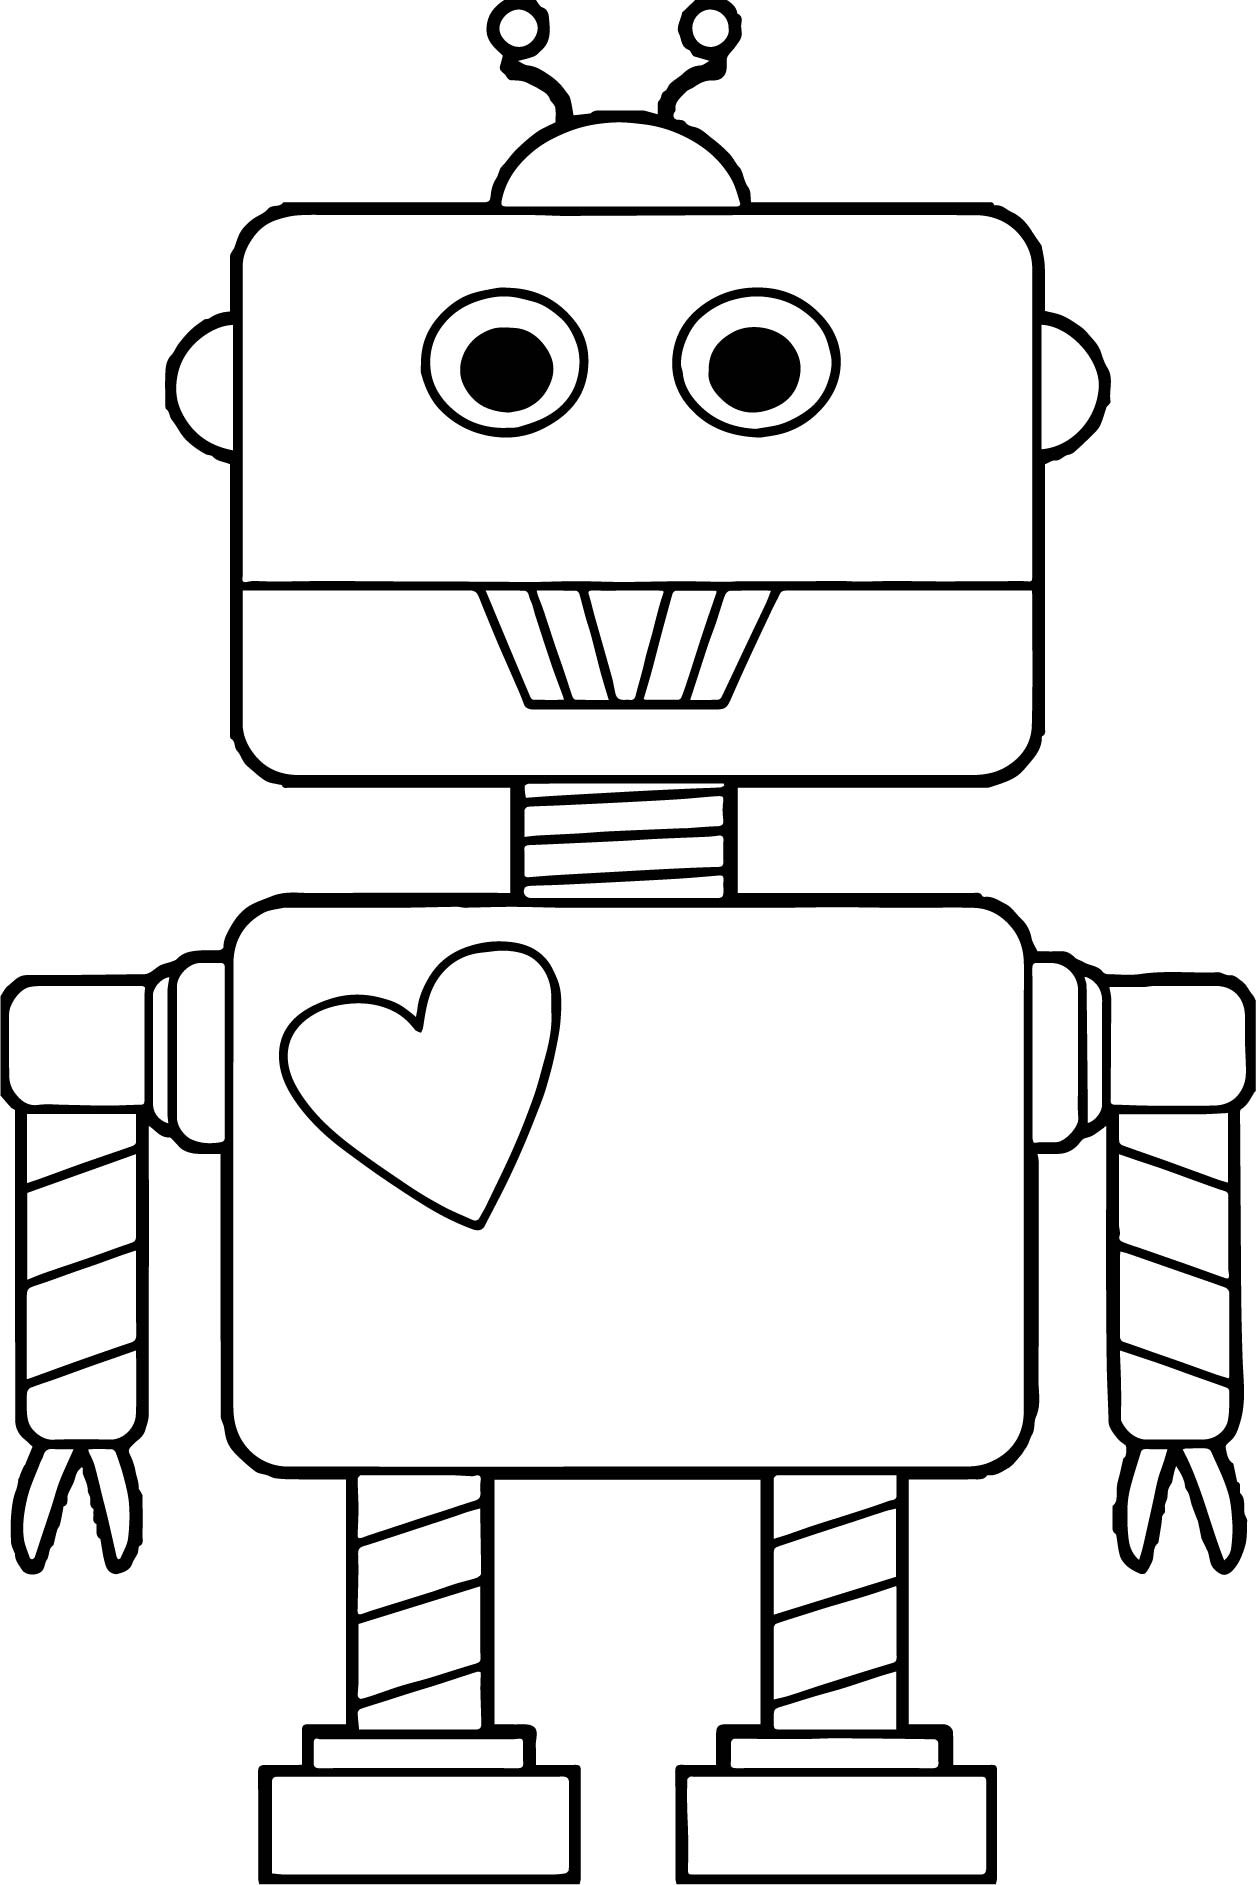 Download Robot With Heart Coloring Page - Free Printable Coloring ...